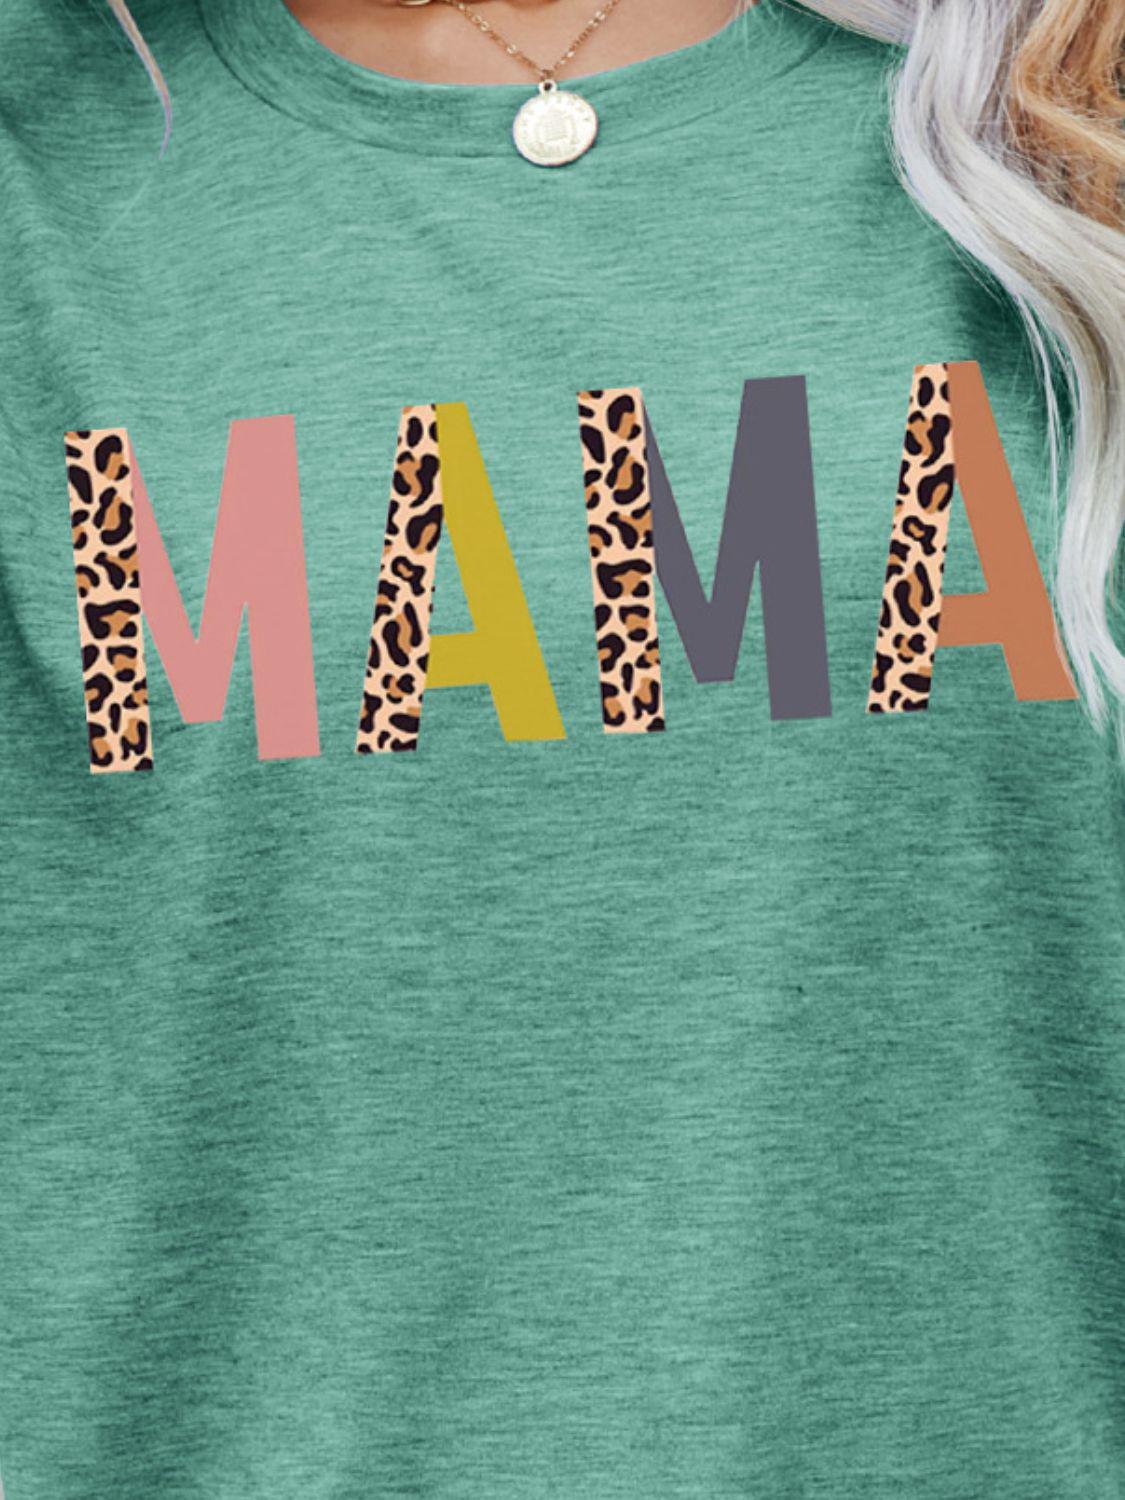 BEST MAMA Leopard Graphic Short Sleeve Tee BLUE ZONE PLANET